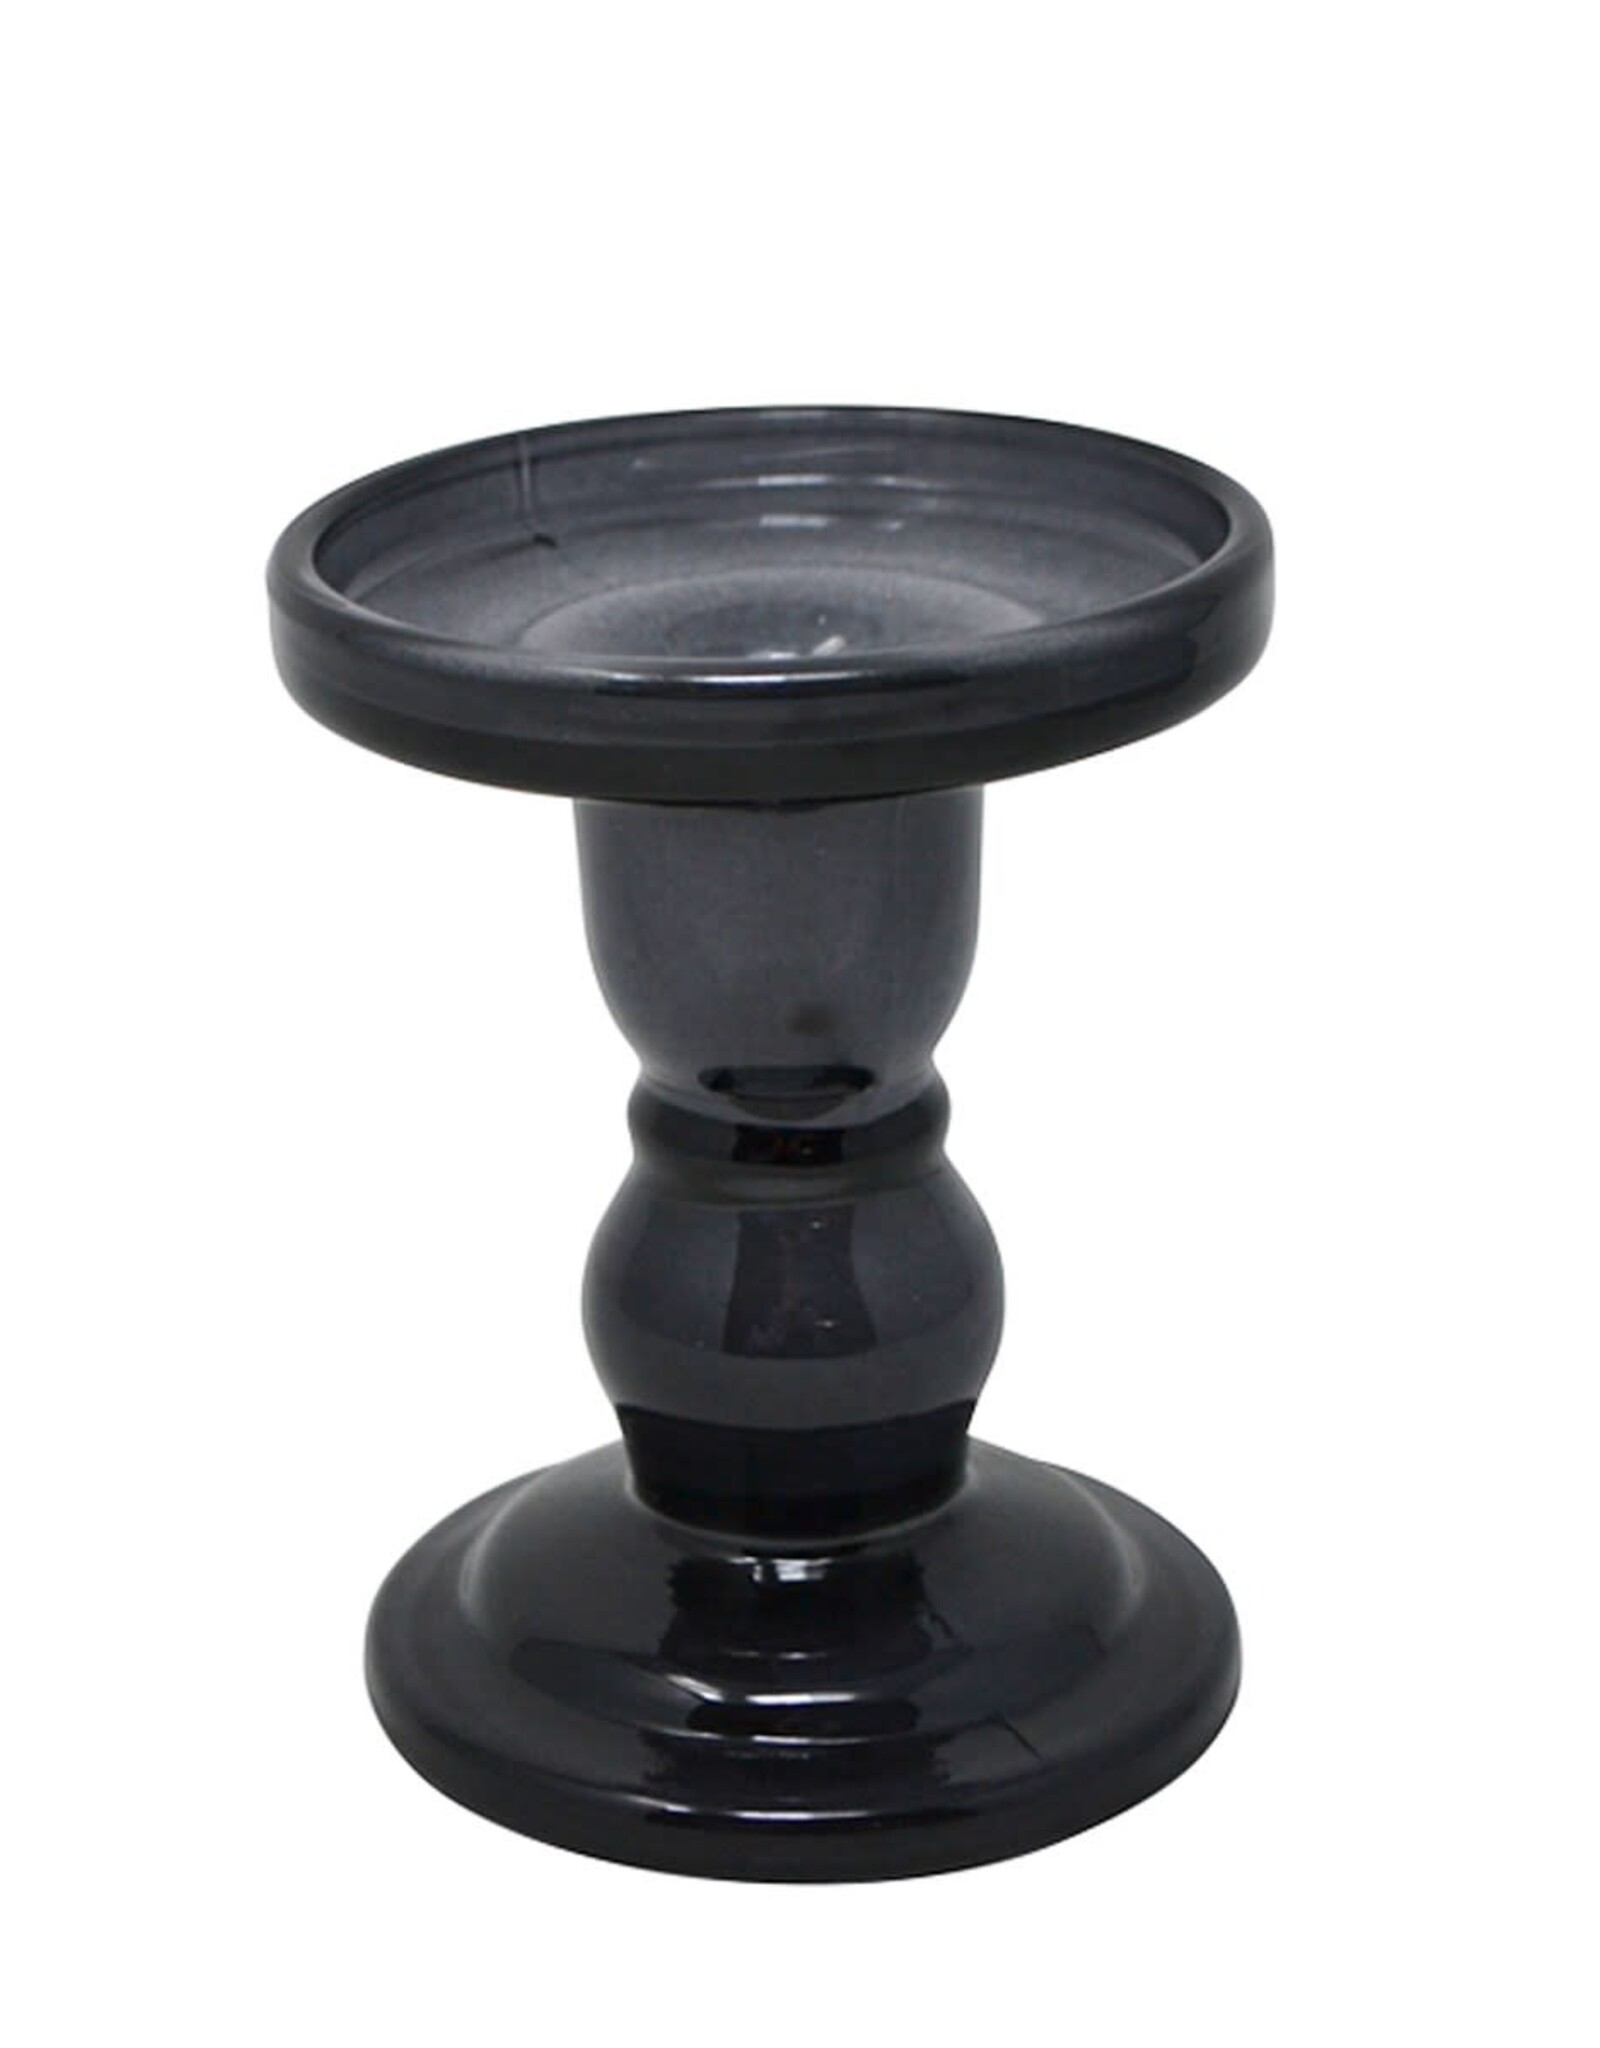 NIA - Candle Holder / Black Glass